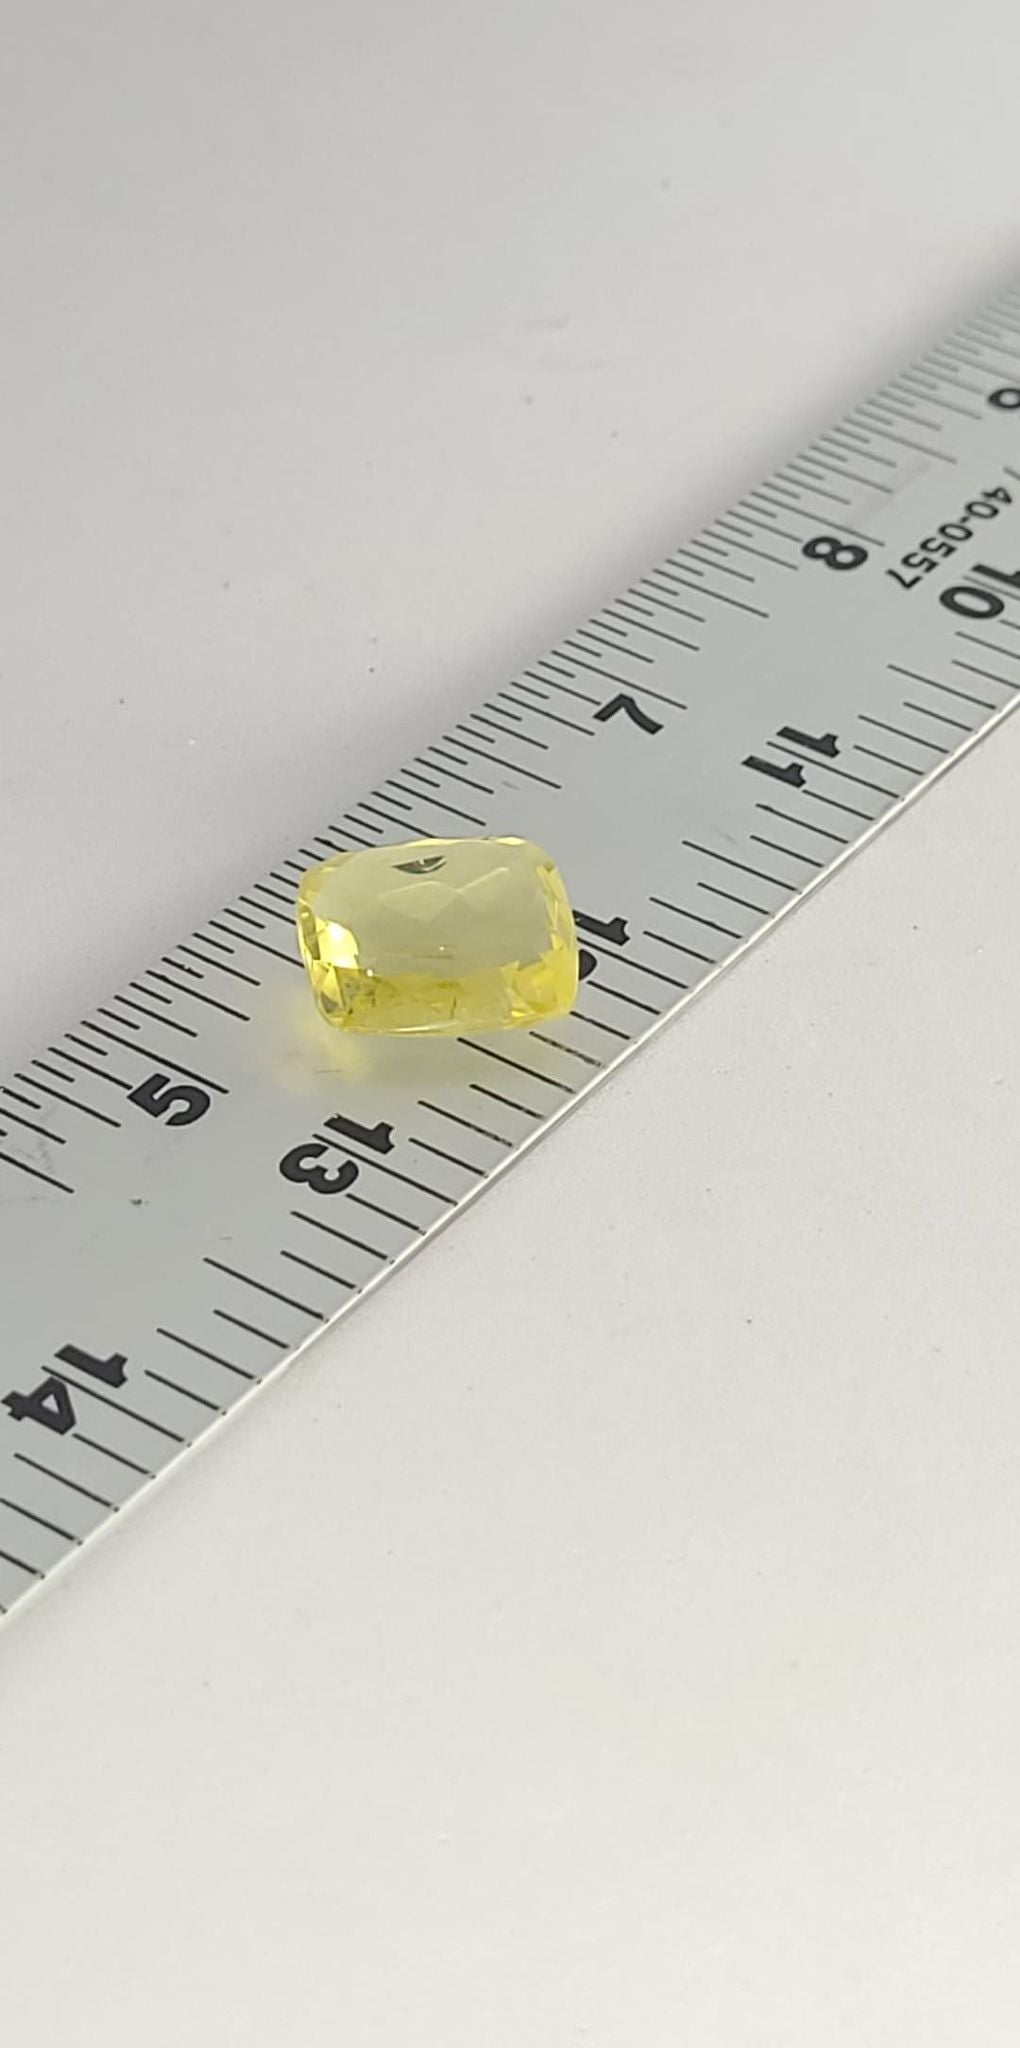 Faceted Gemstones, Yellow Sapphire, Jewelry grade